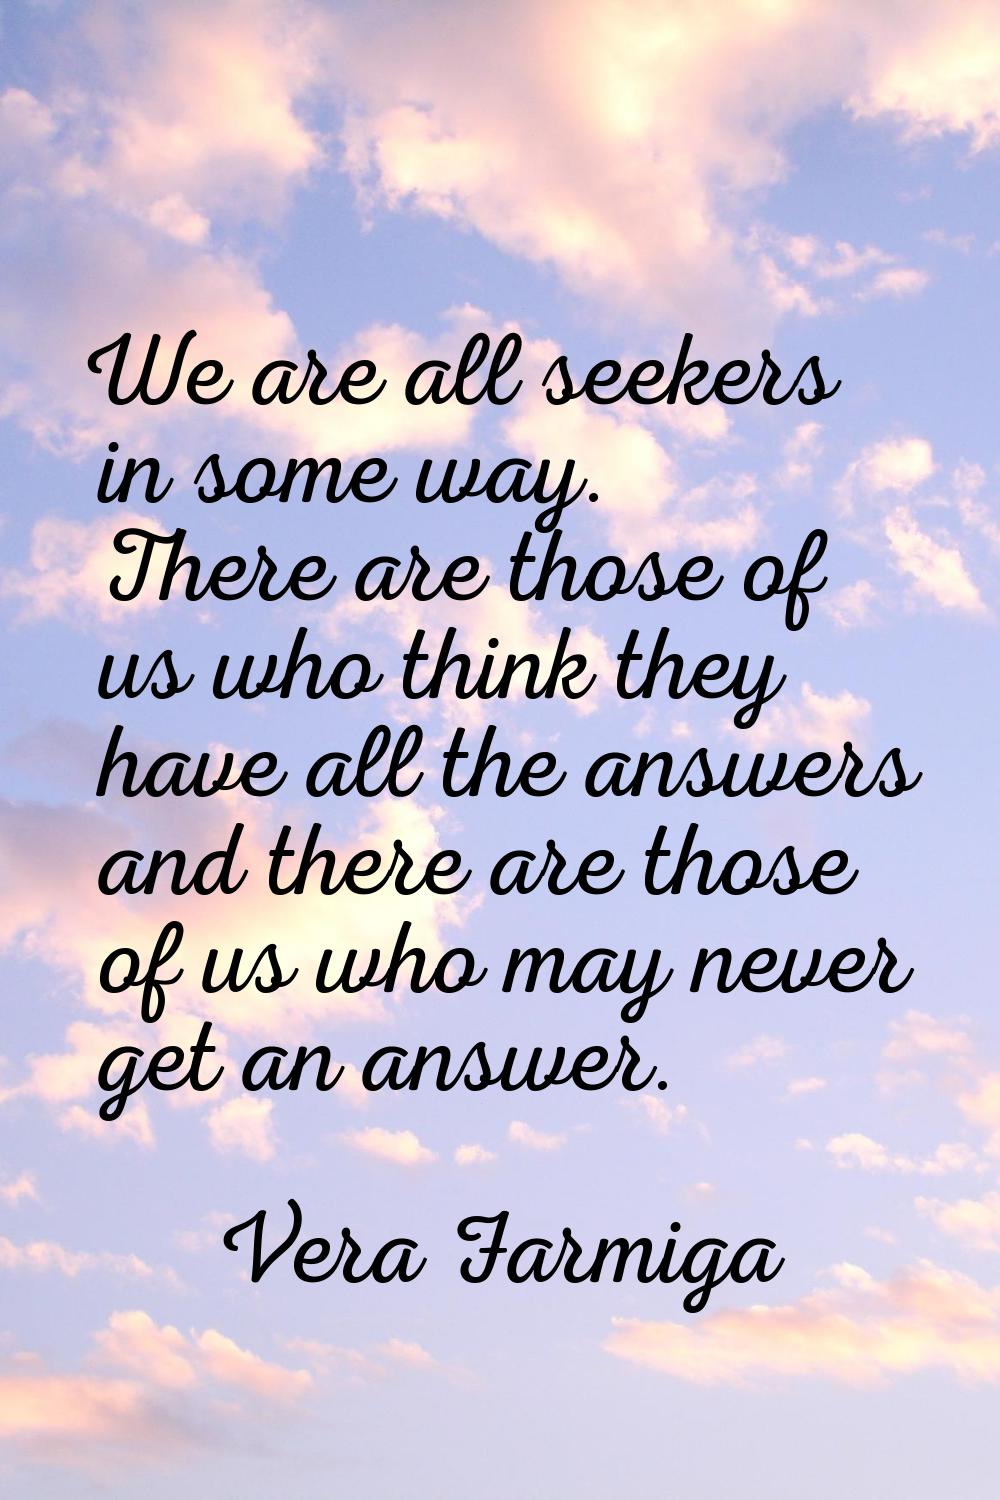 We are all seekers in some way. There are those of us who think they have all the answers and there